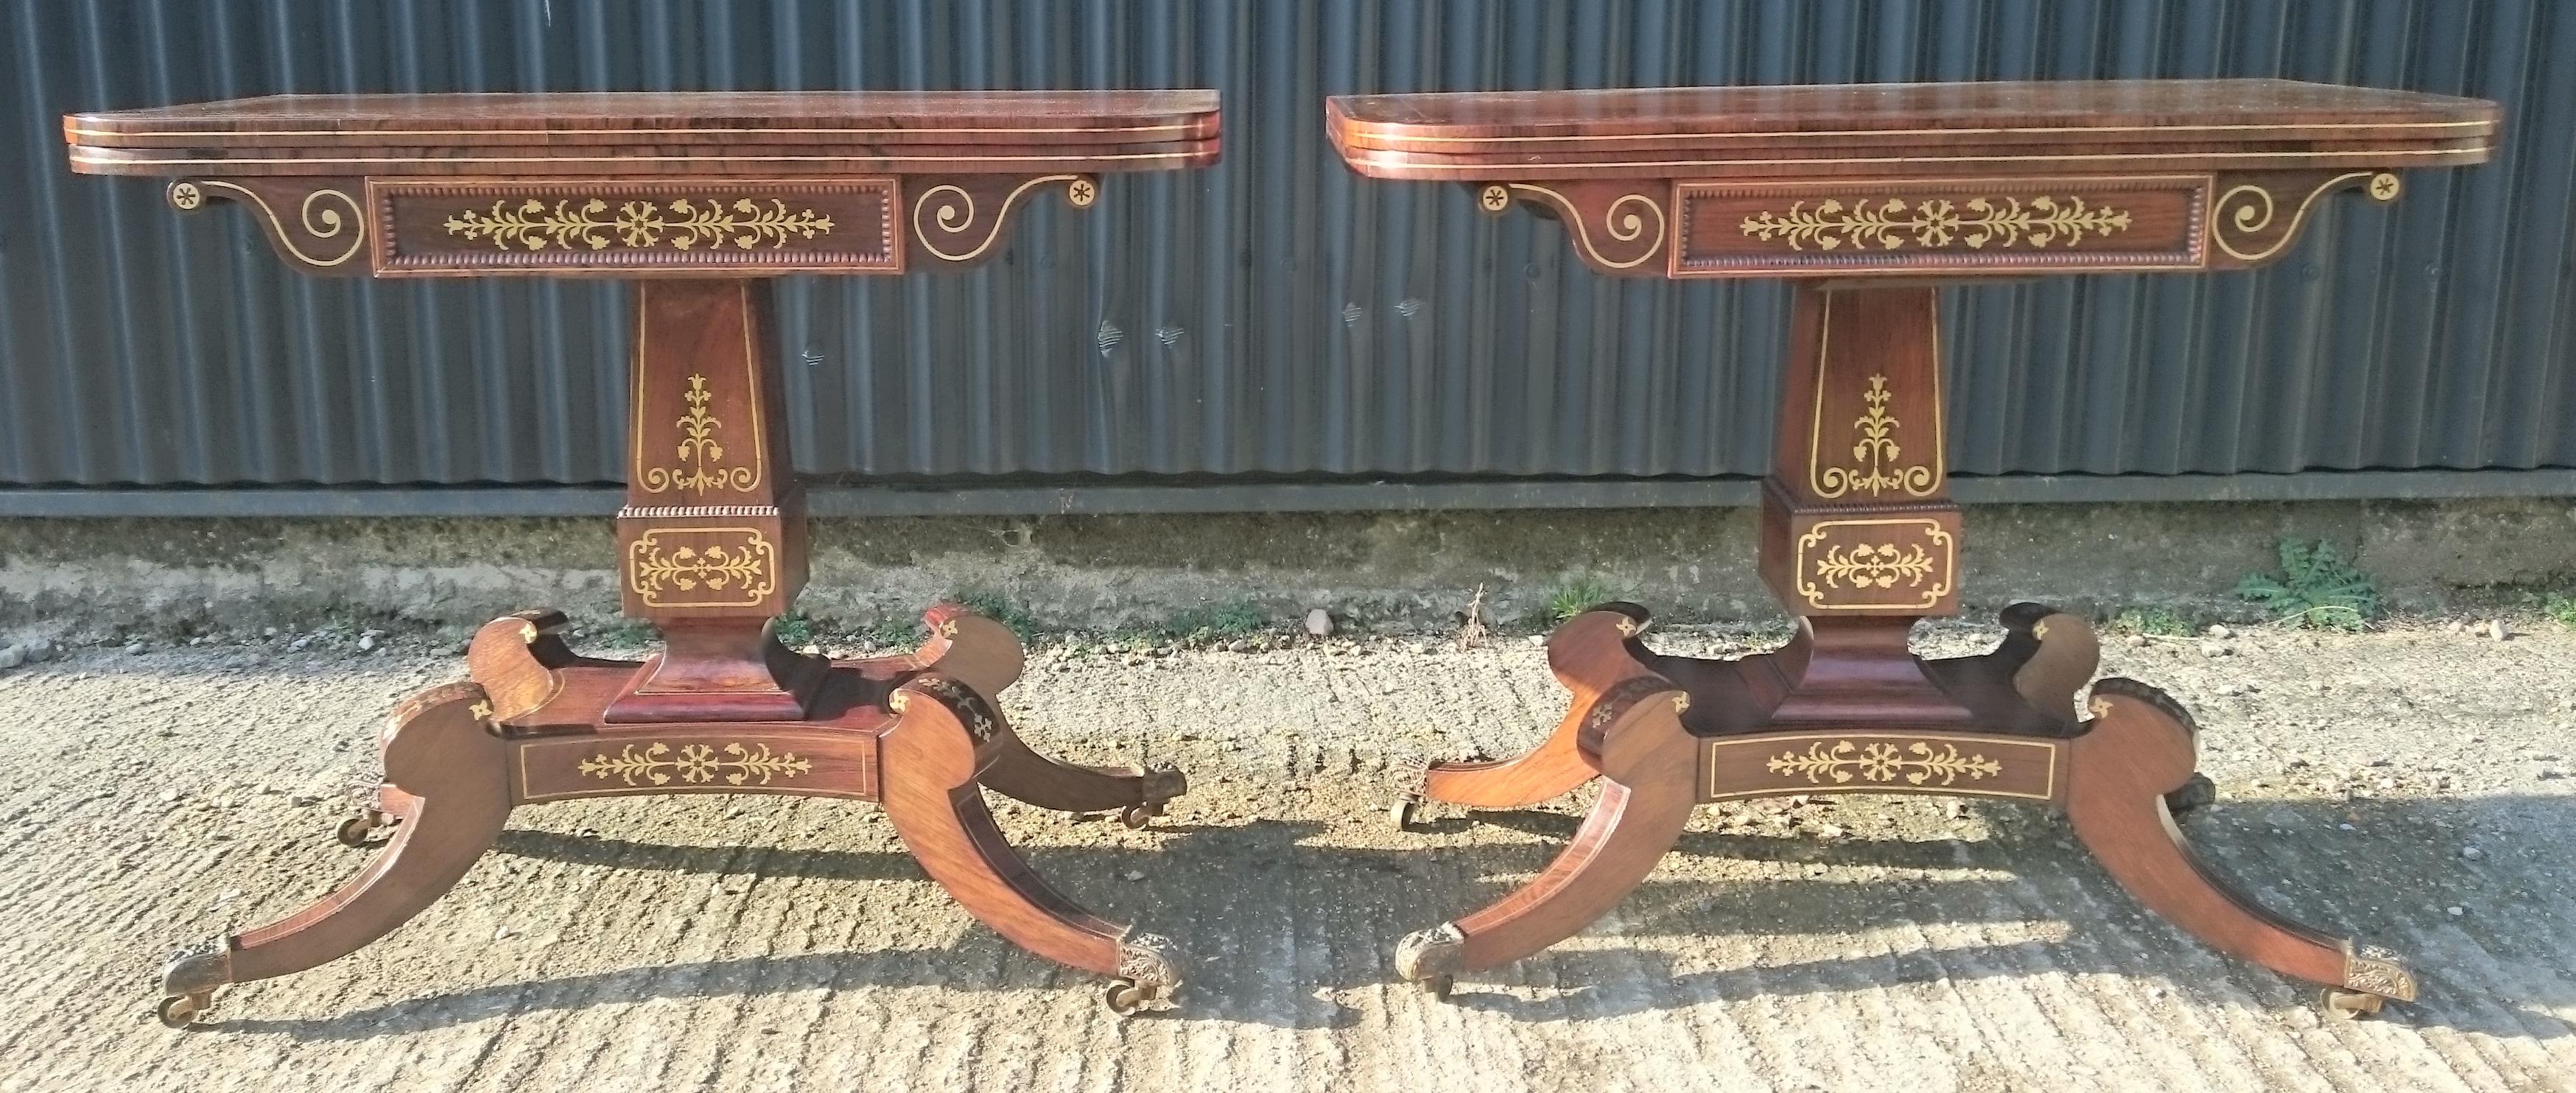 This is one of the finest pairs of card tables that we have seen. They were found in wonderfully original condition with no polish left but more importantly with no previous repairs. These antique card tables are very well drawn with absolutely